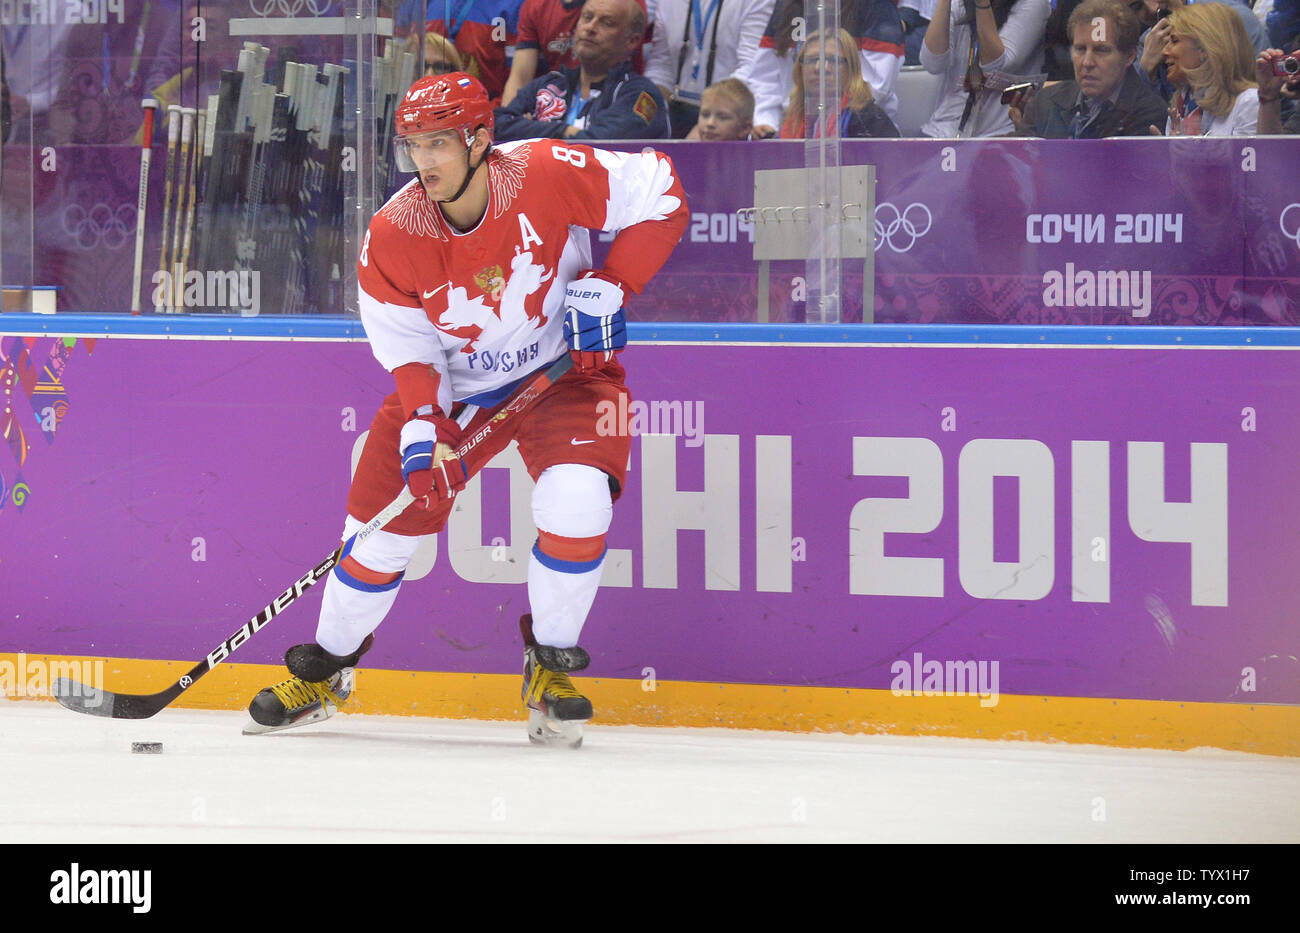 NHL star Alex Ovechkin to be first torch-bearer ahead of Sochi